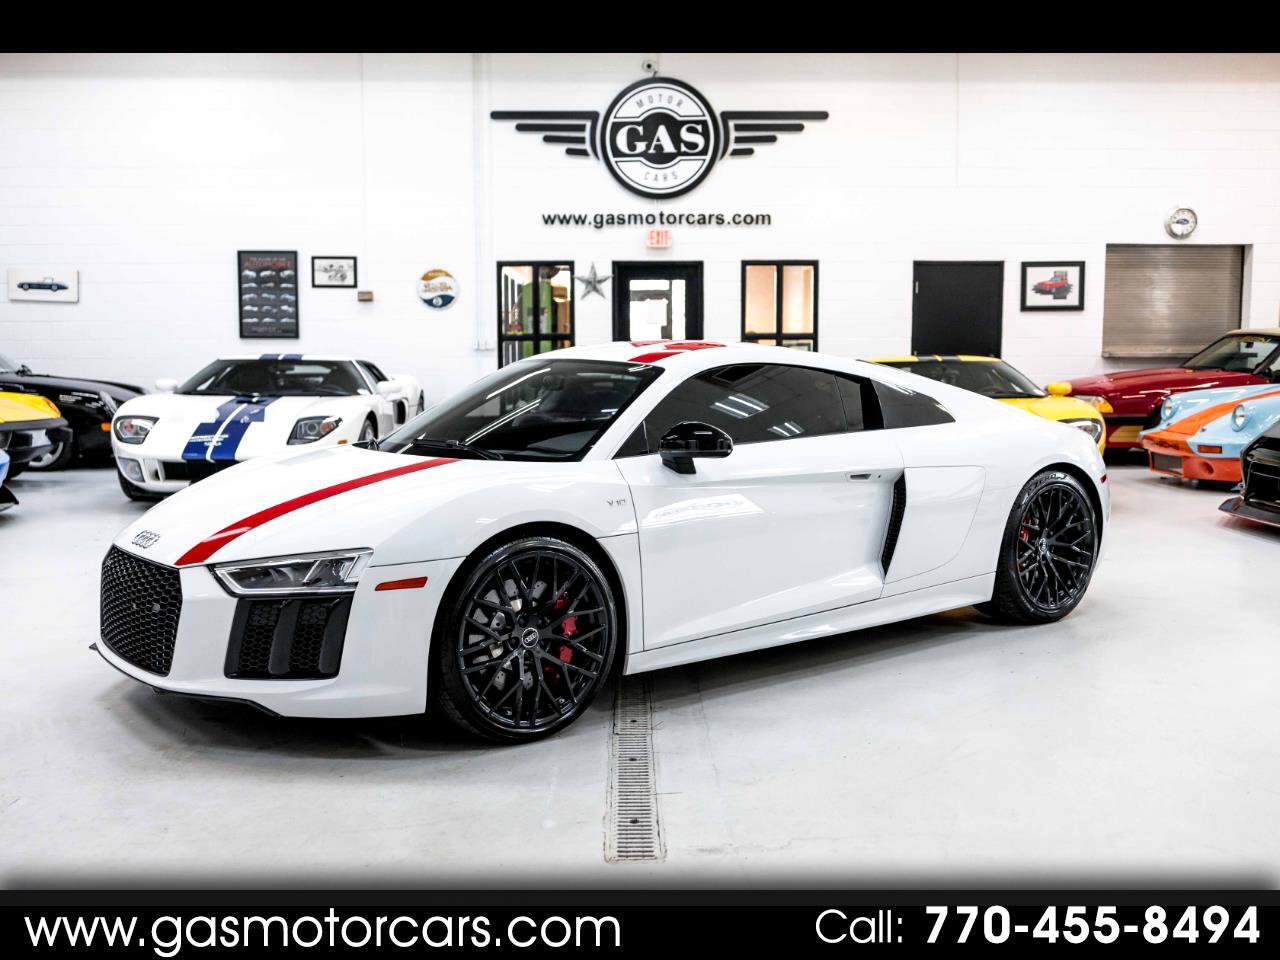 Used 2018 Audi R8 for Sale Near Me in Lawrenceville, GA - Autotrader